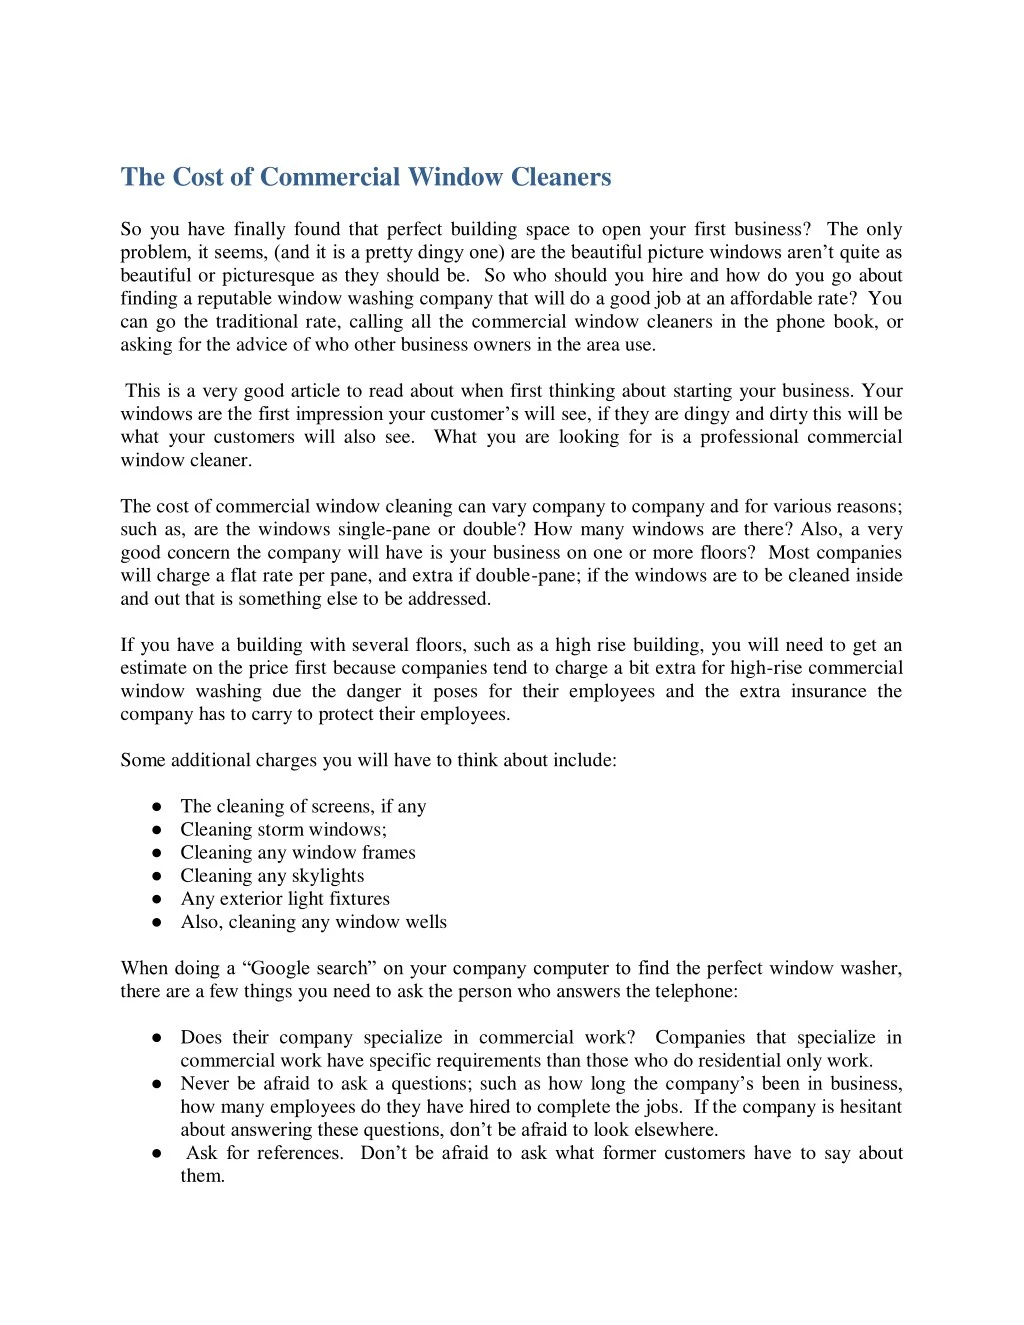 the cost of commercial window cleaners